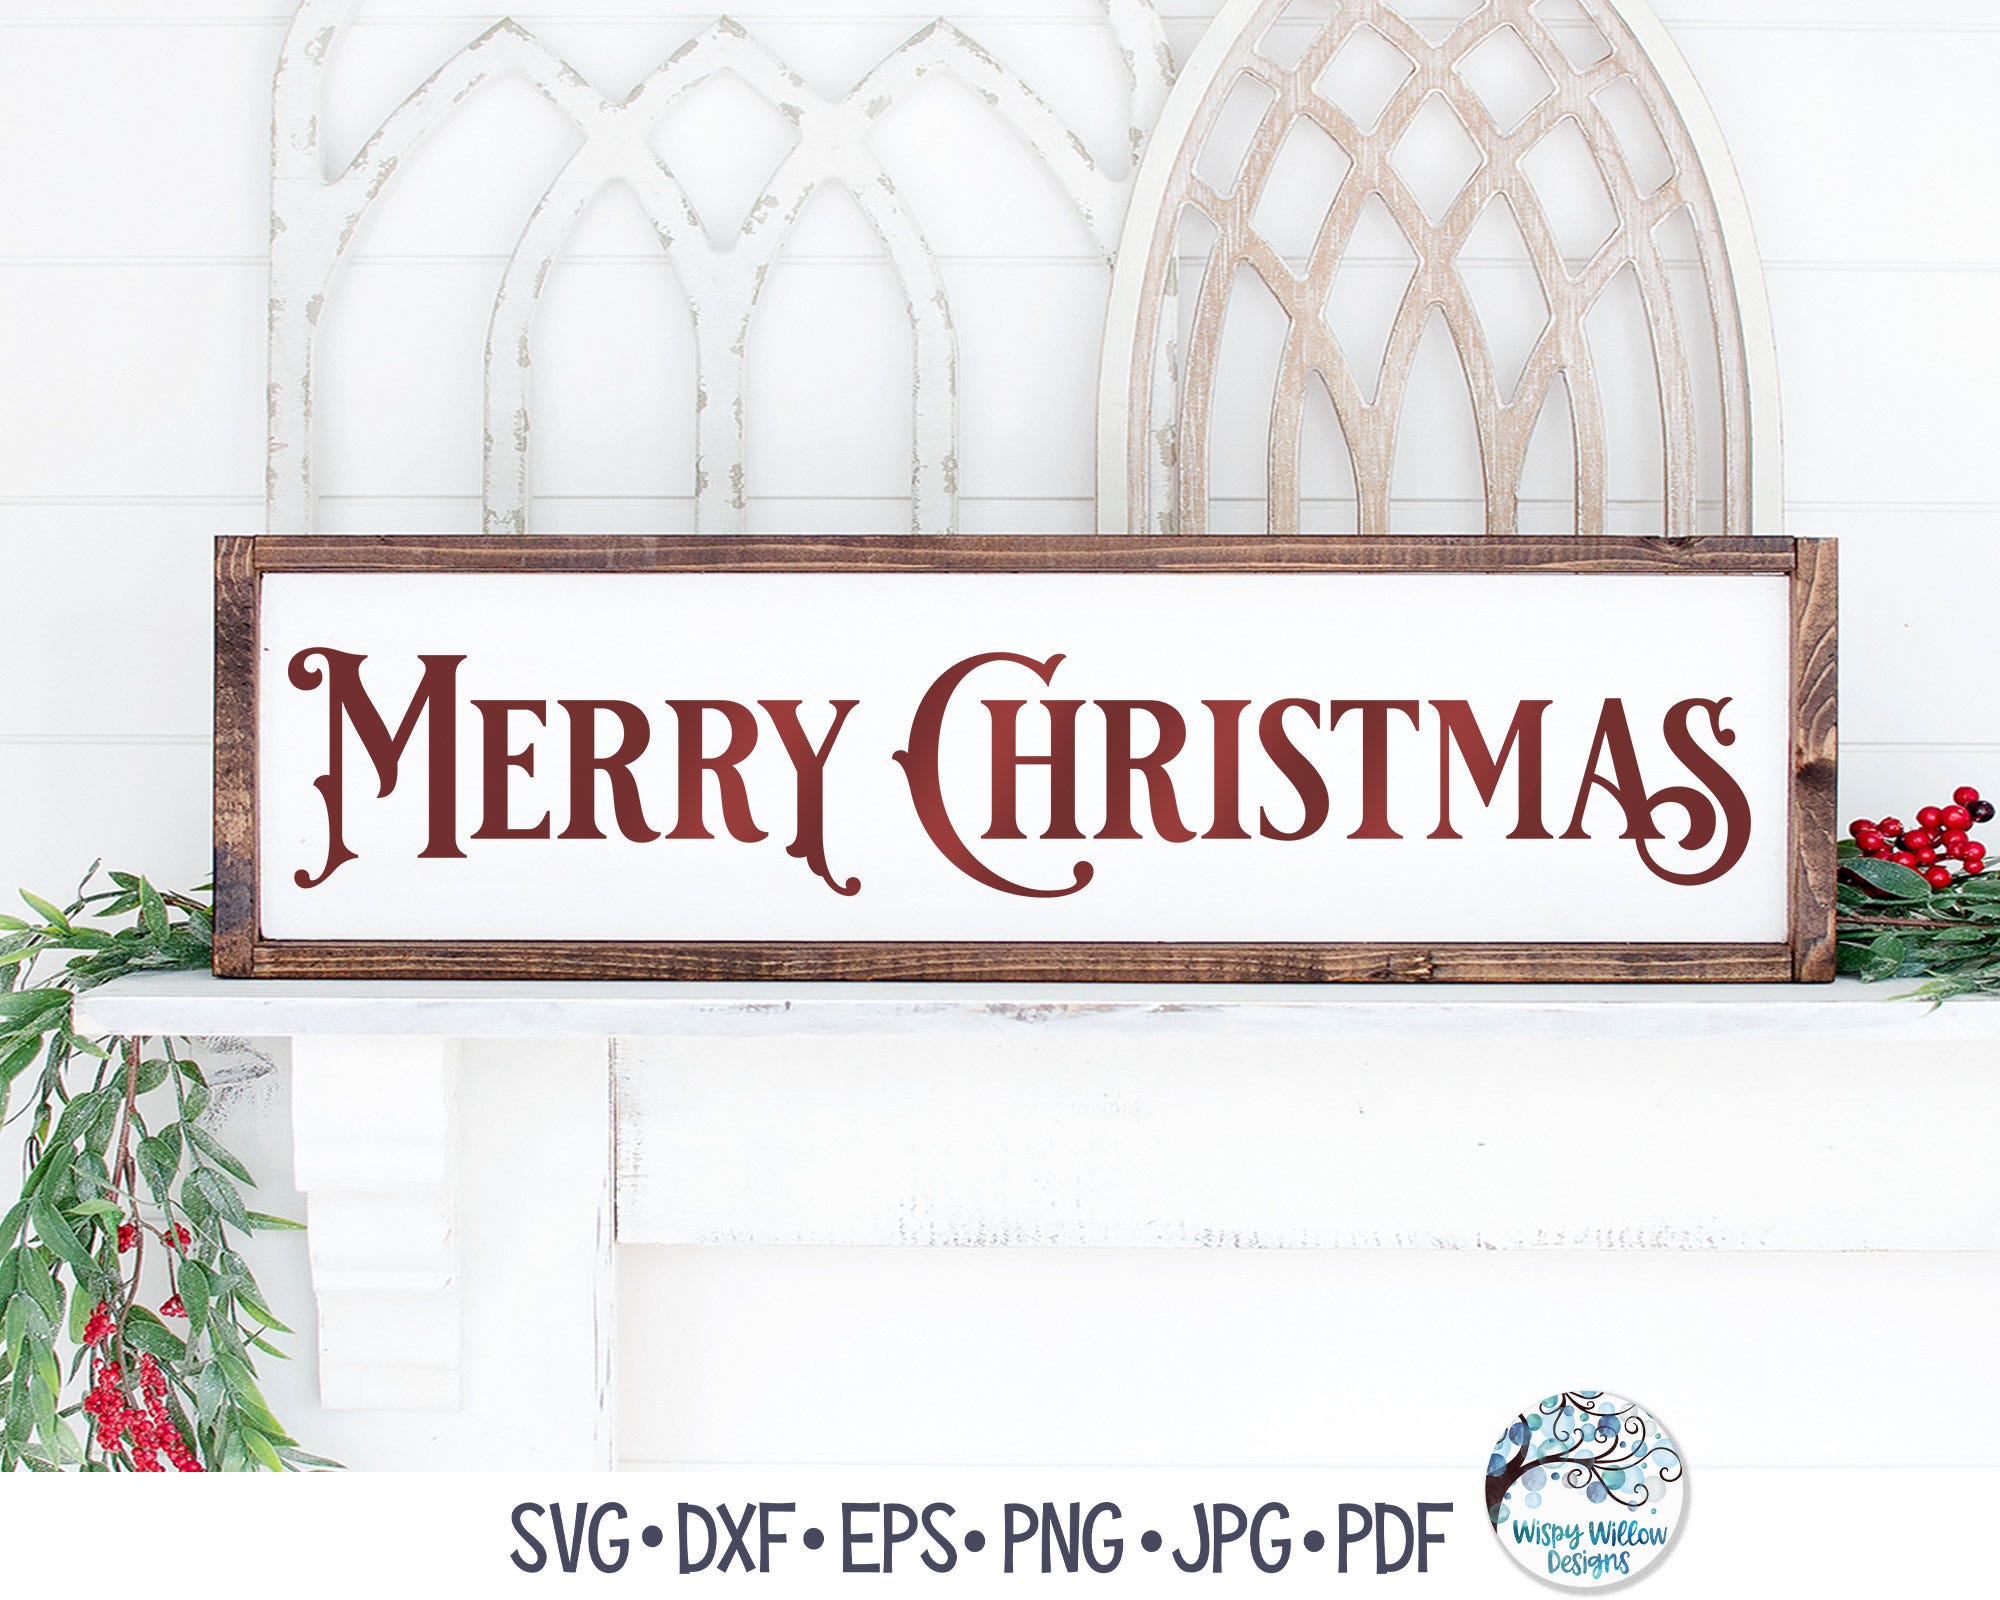 Merry Christmas SVG, Vintage Merry Christmas Sign Design SVG, Vintage Christmas Sign Png, Long Horizontal Sign, Vinyl Decal File for Cricut